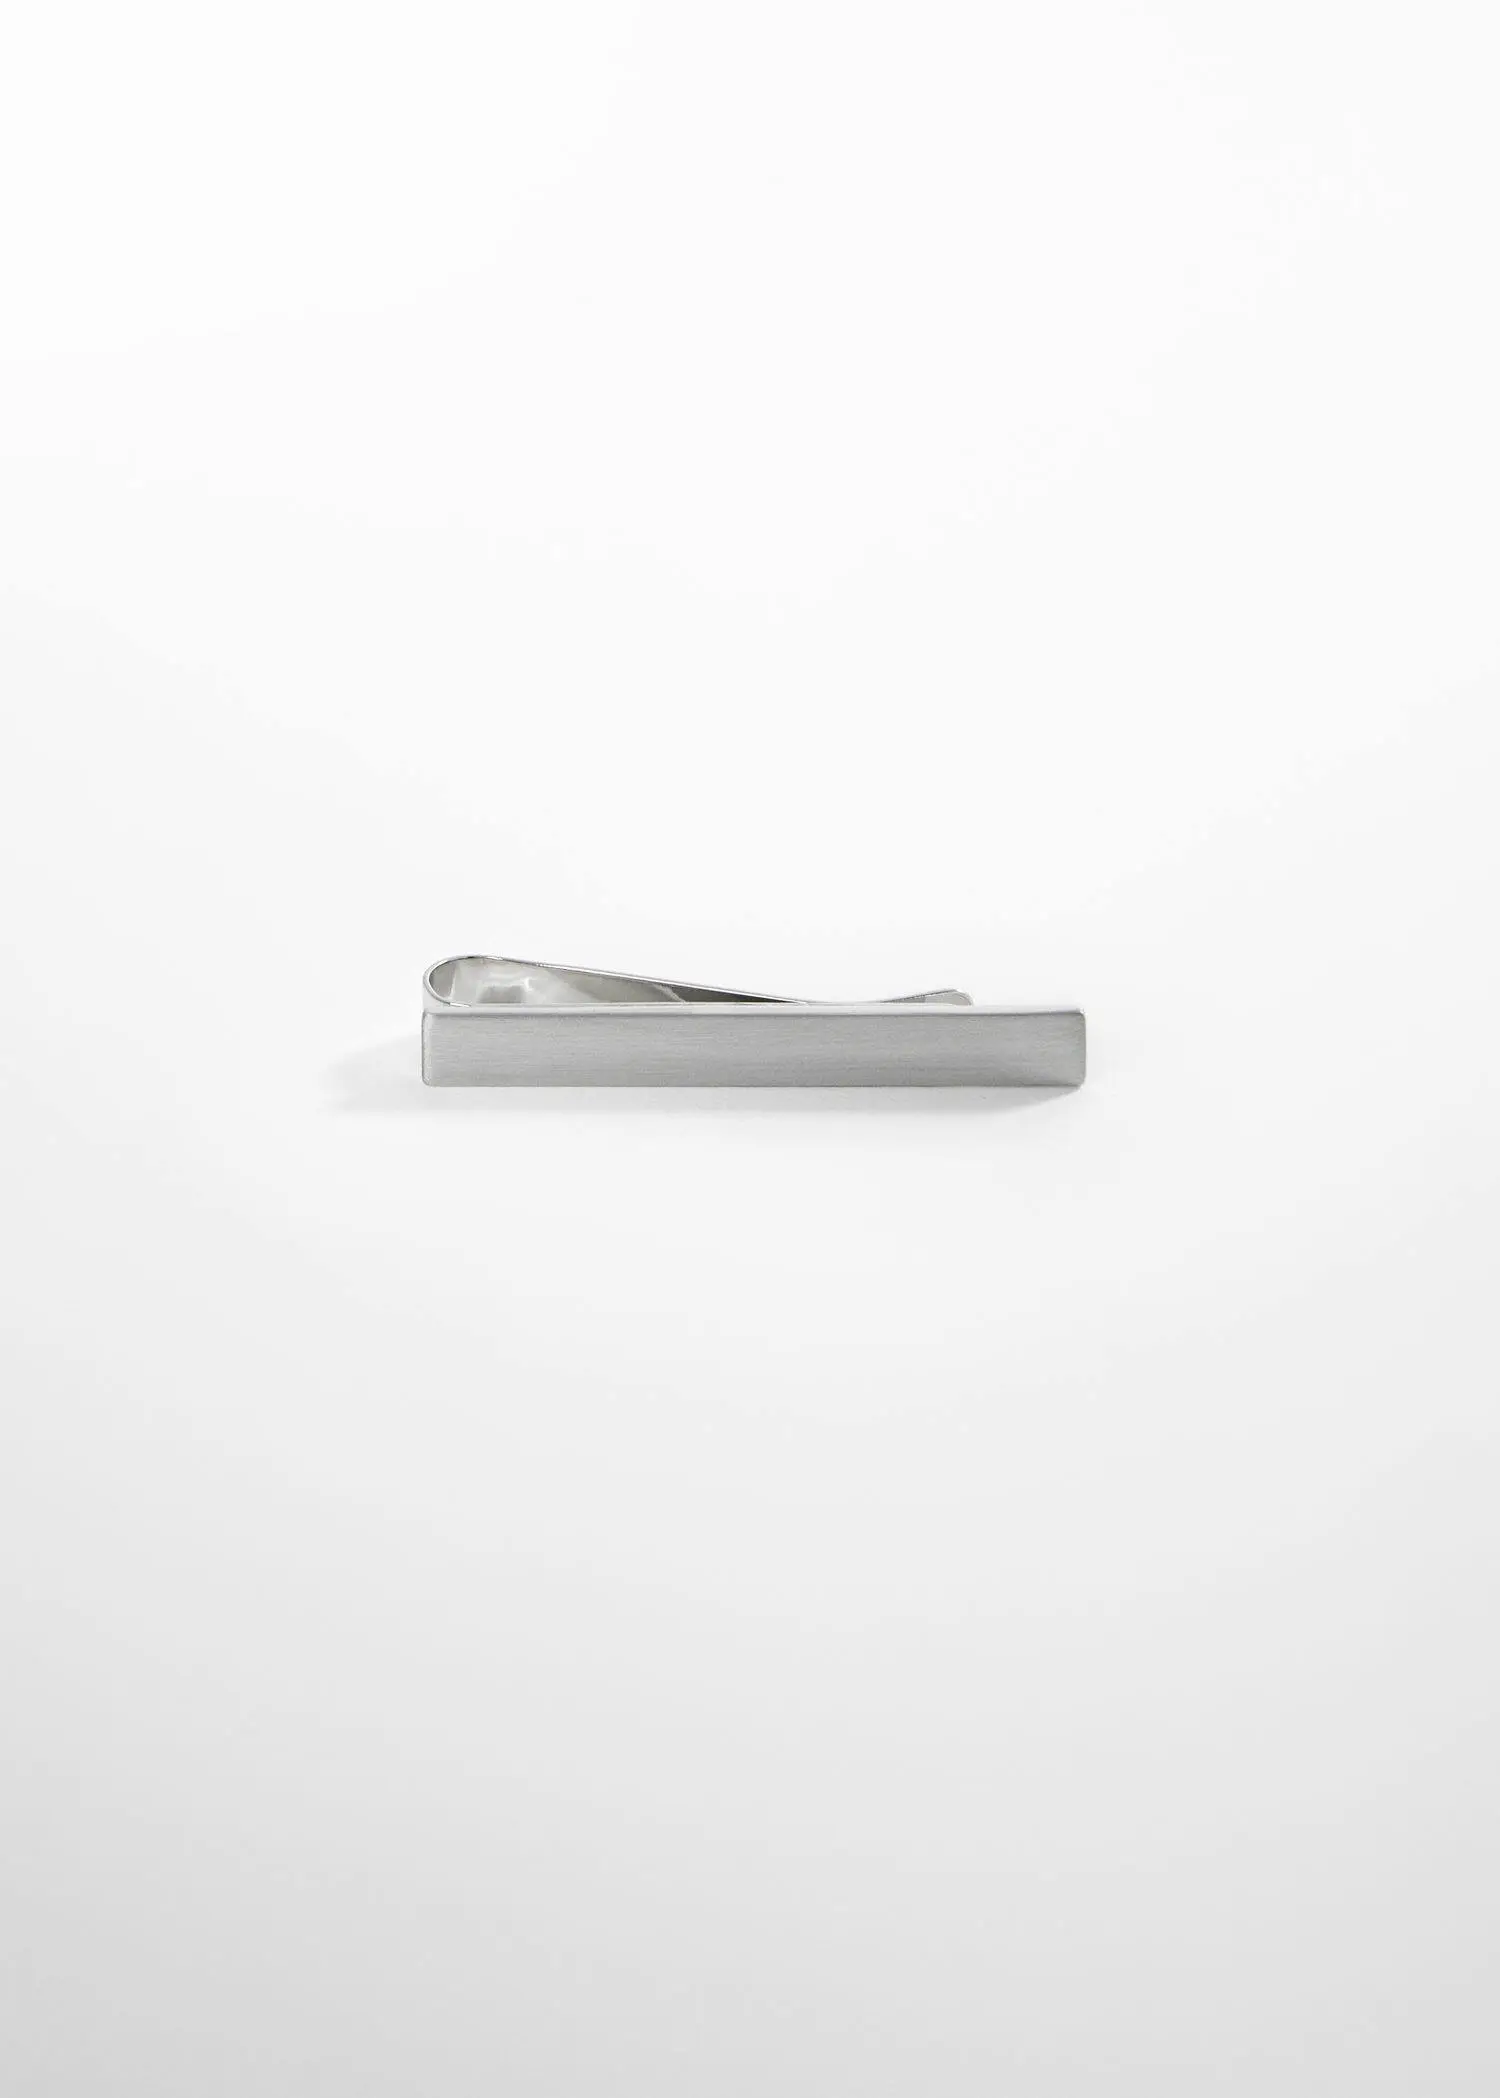 Mango Metal tie clip. a silver tie bar sitting on top of a table. 